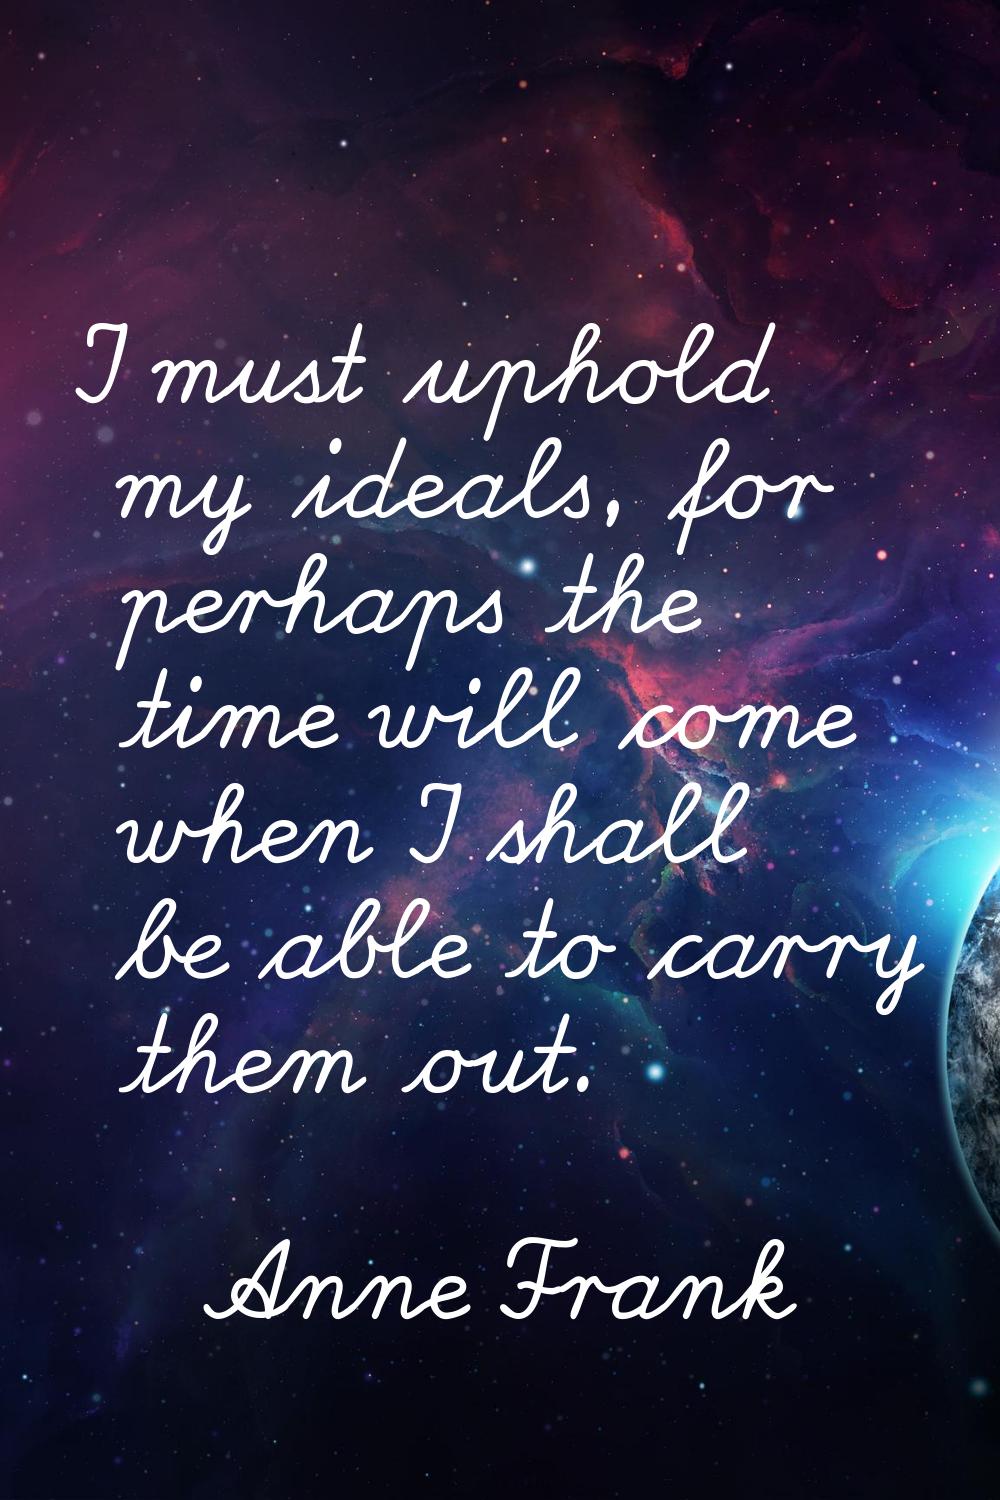 I must uphold my ideals, for perhaps the time will come when I shall be able to carry them out.